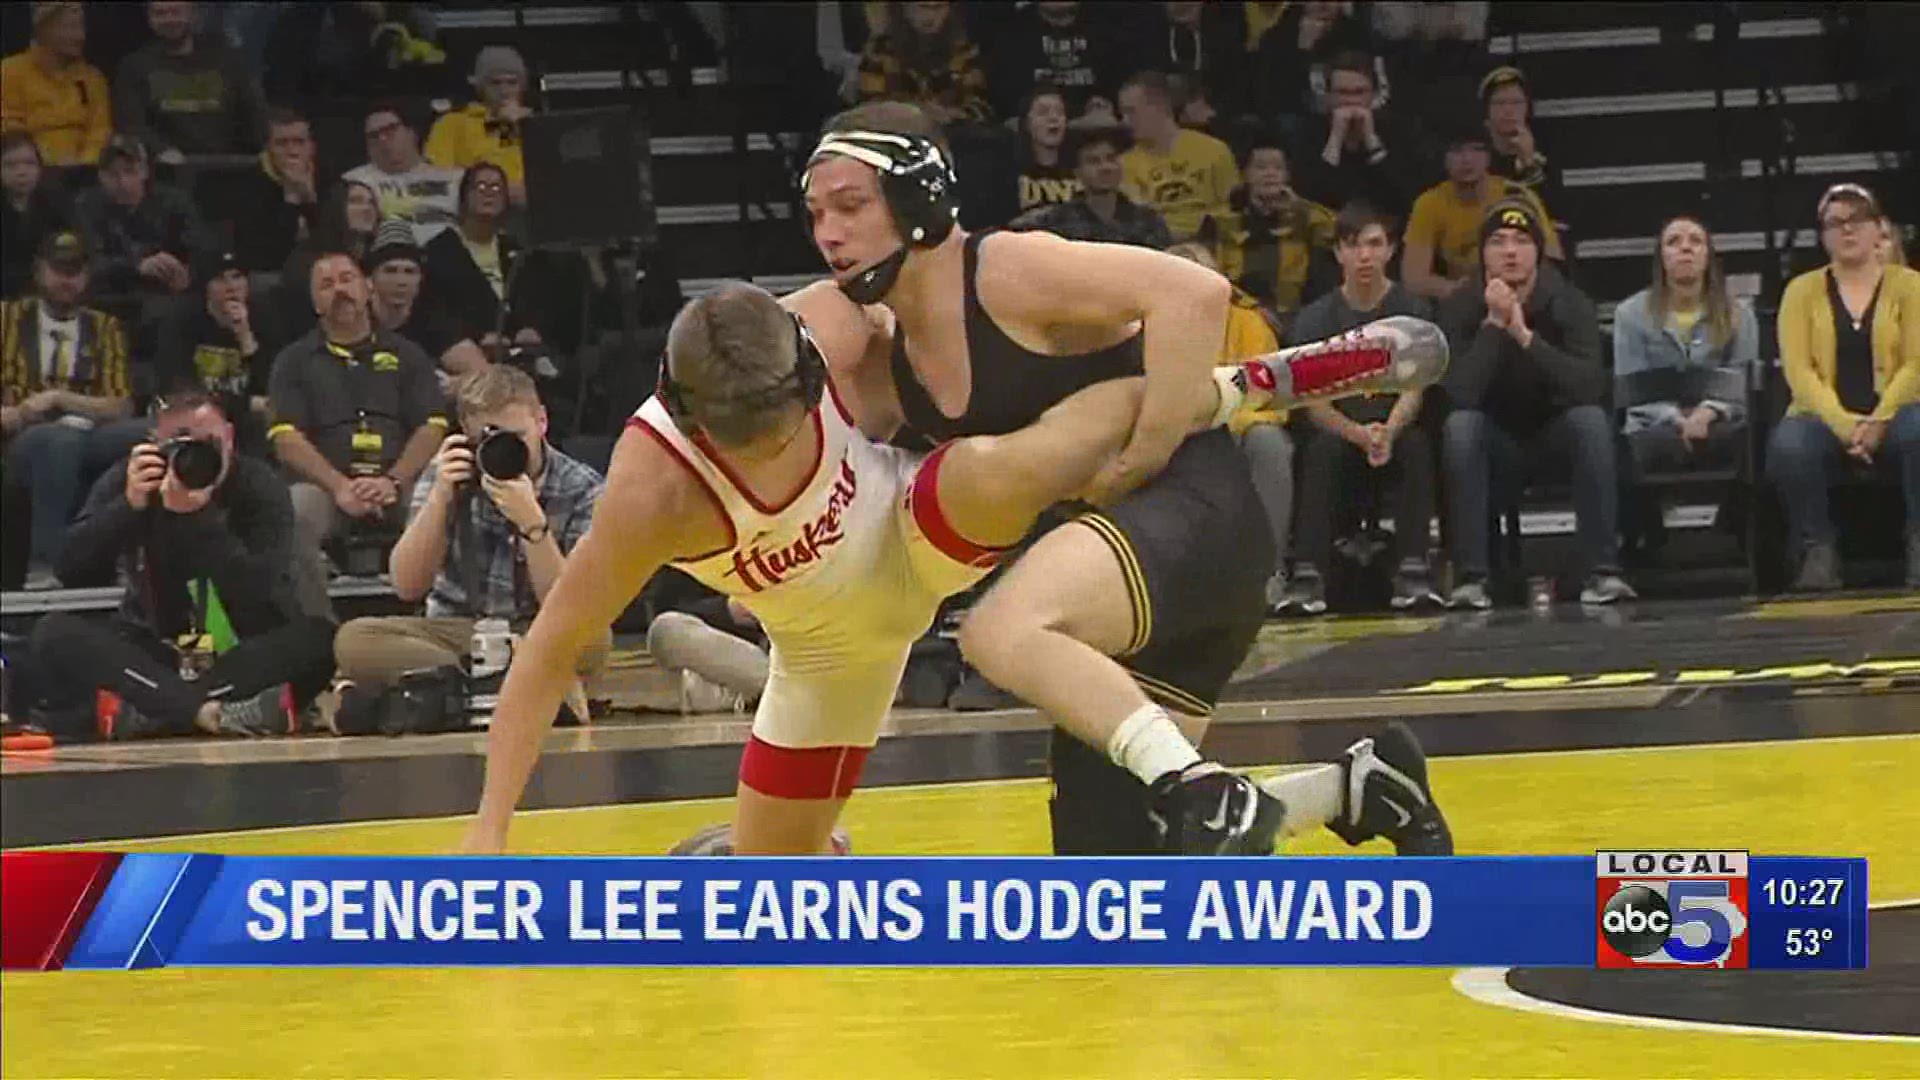 The Hodge Trophy is considered the top award in college wrestling.